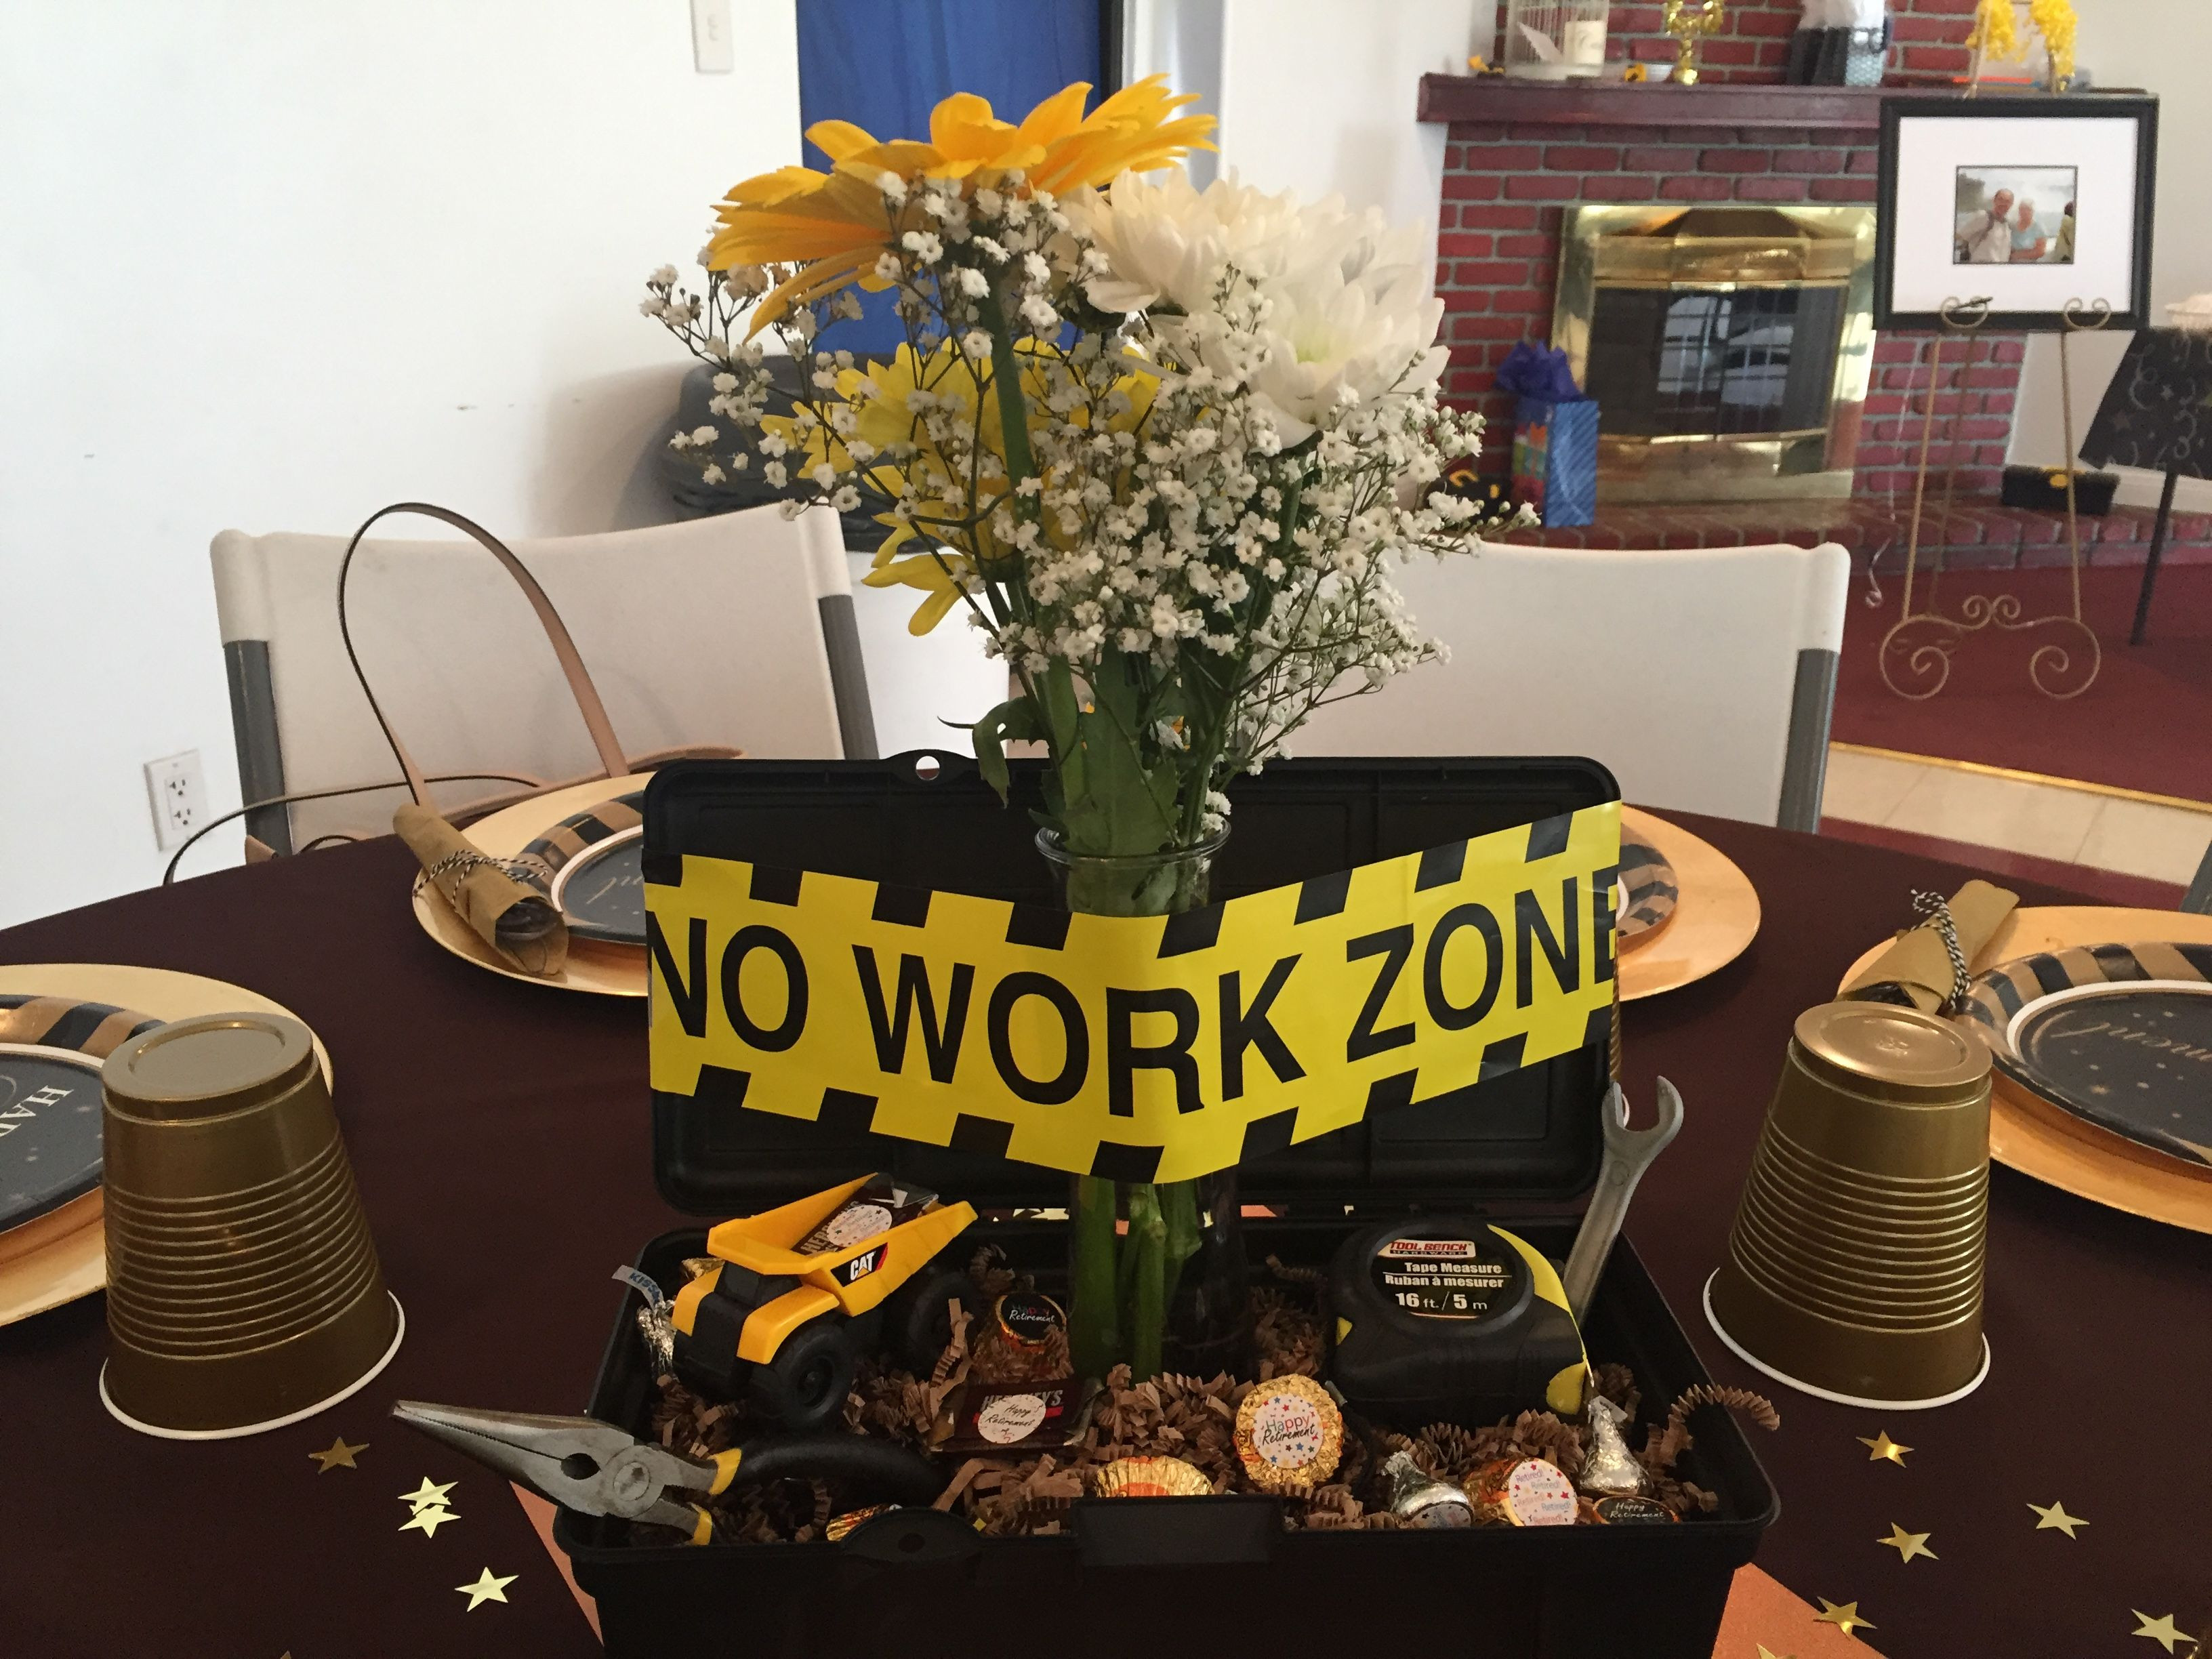 Man Retirement Party Ideas
 I couldn t find a retirement party centerpiece for a